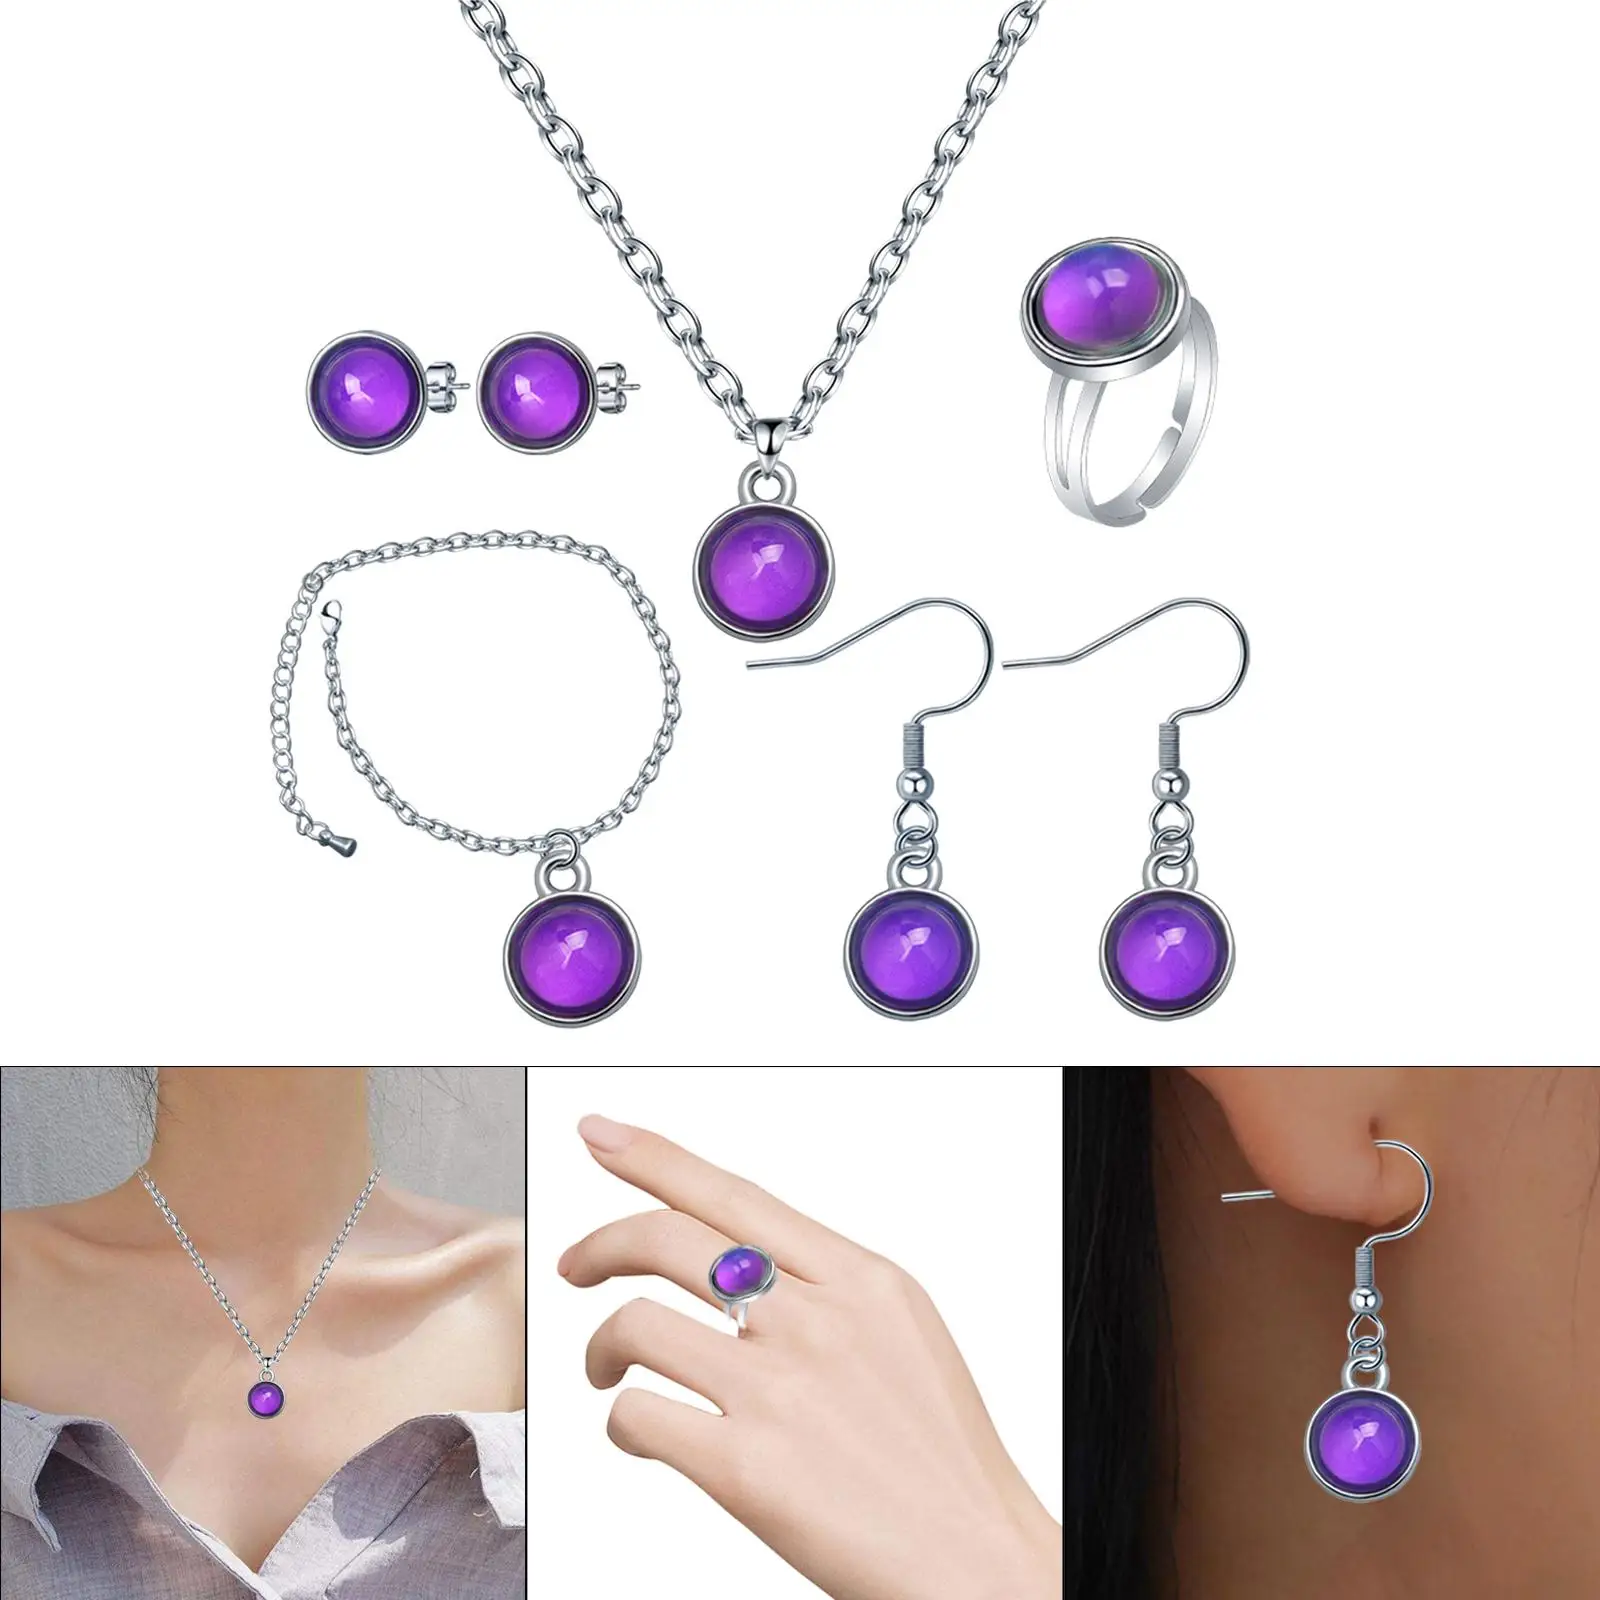 Mood Necklace Jewelry Set Fashion Temperature Sensing Mood Jewelry for Girls Women Wife Girlfriend Daughter Mom Valentine`s Day